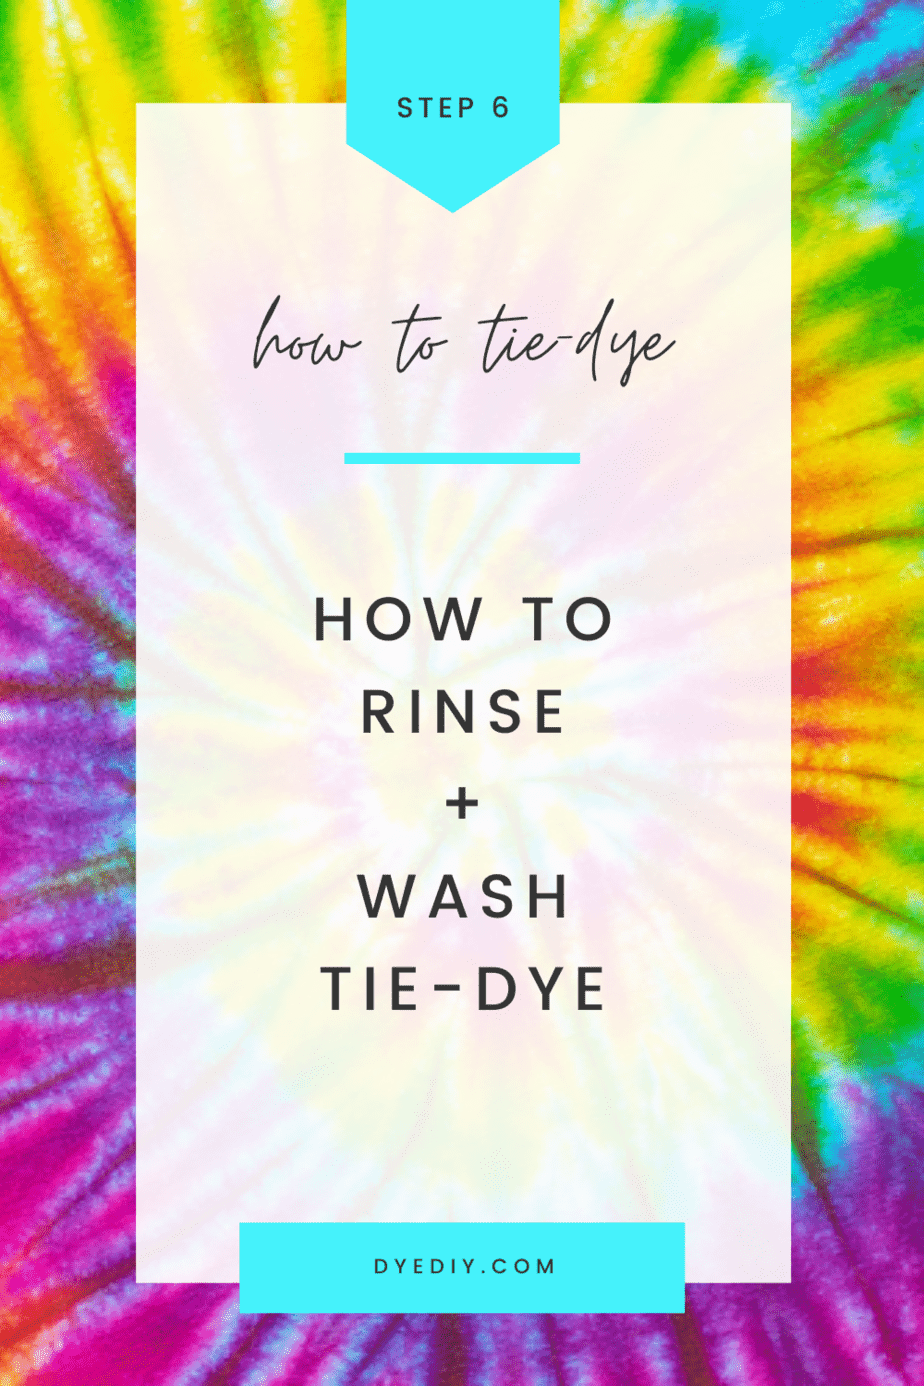 How to tie-dye guide - How to Rinse and Wash Tie-Dye Clothes